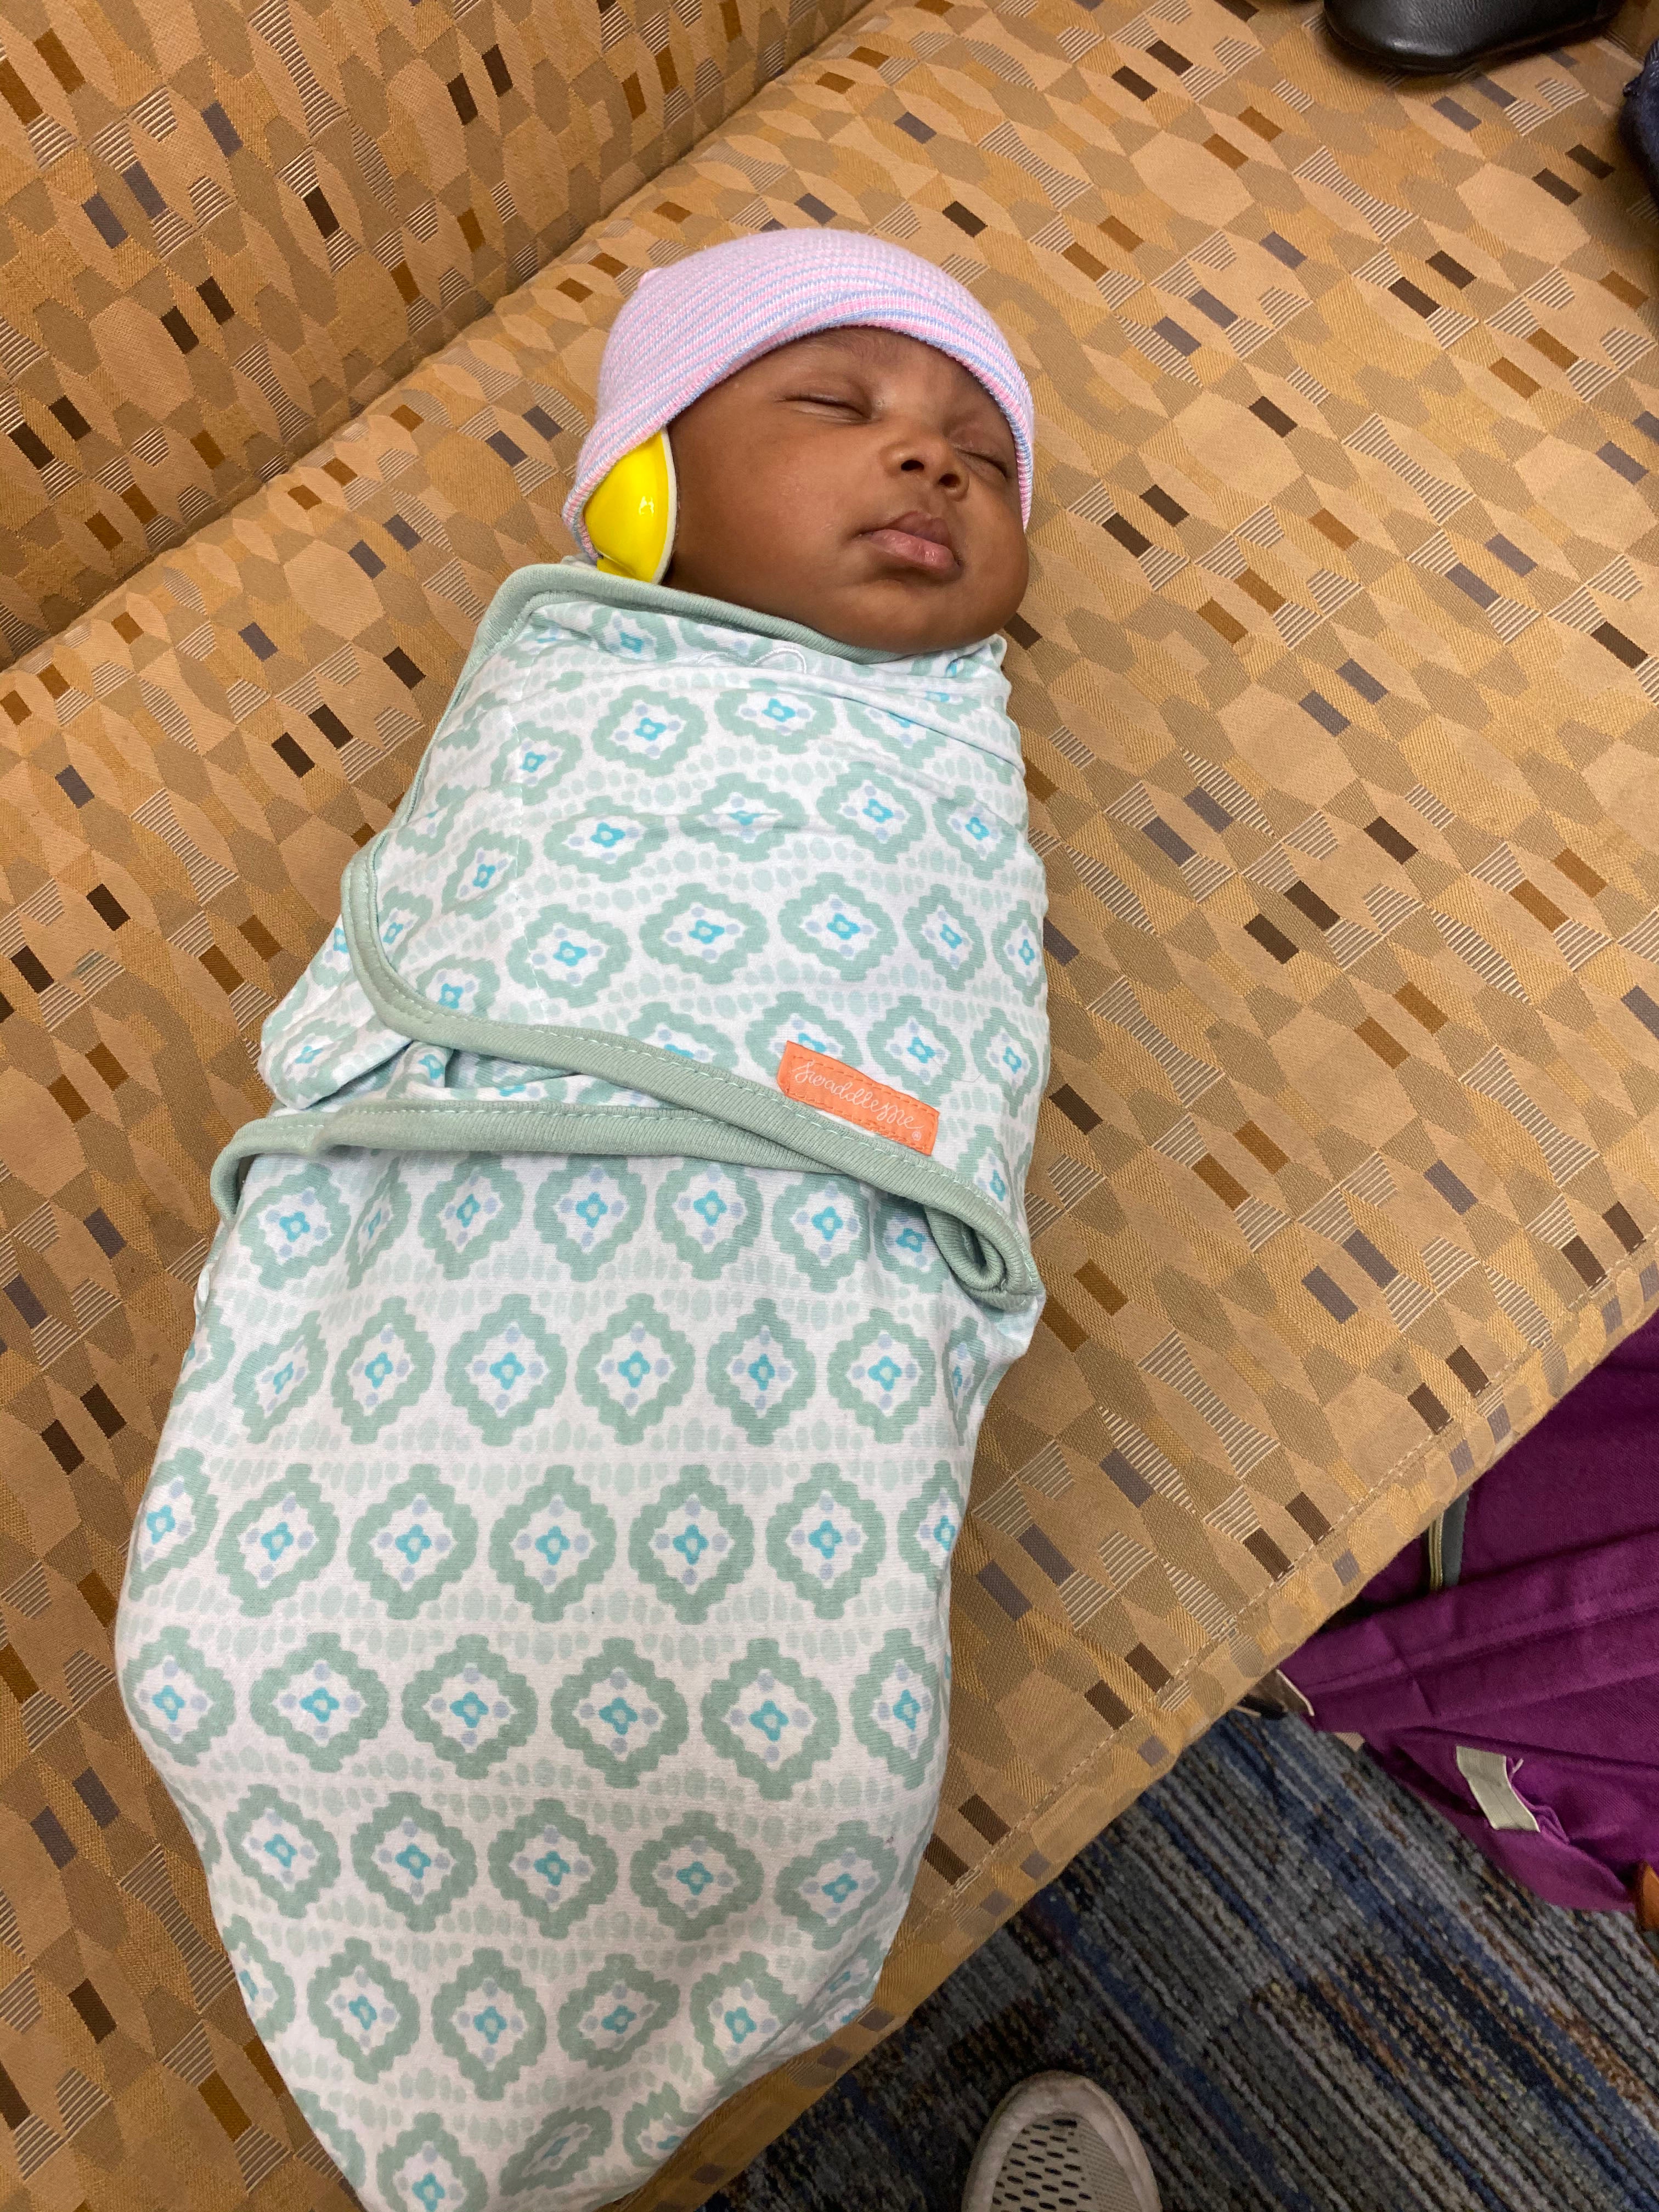 Photo caption: A baby, swaddled and wearing ear protectors to help them stay asleep naturally, is prepared for an MRI scan as part of the HEALthy Brain and Child Development Study.